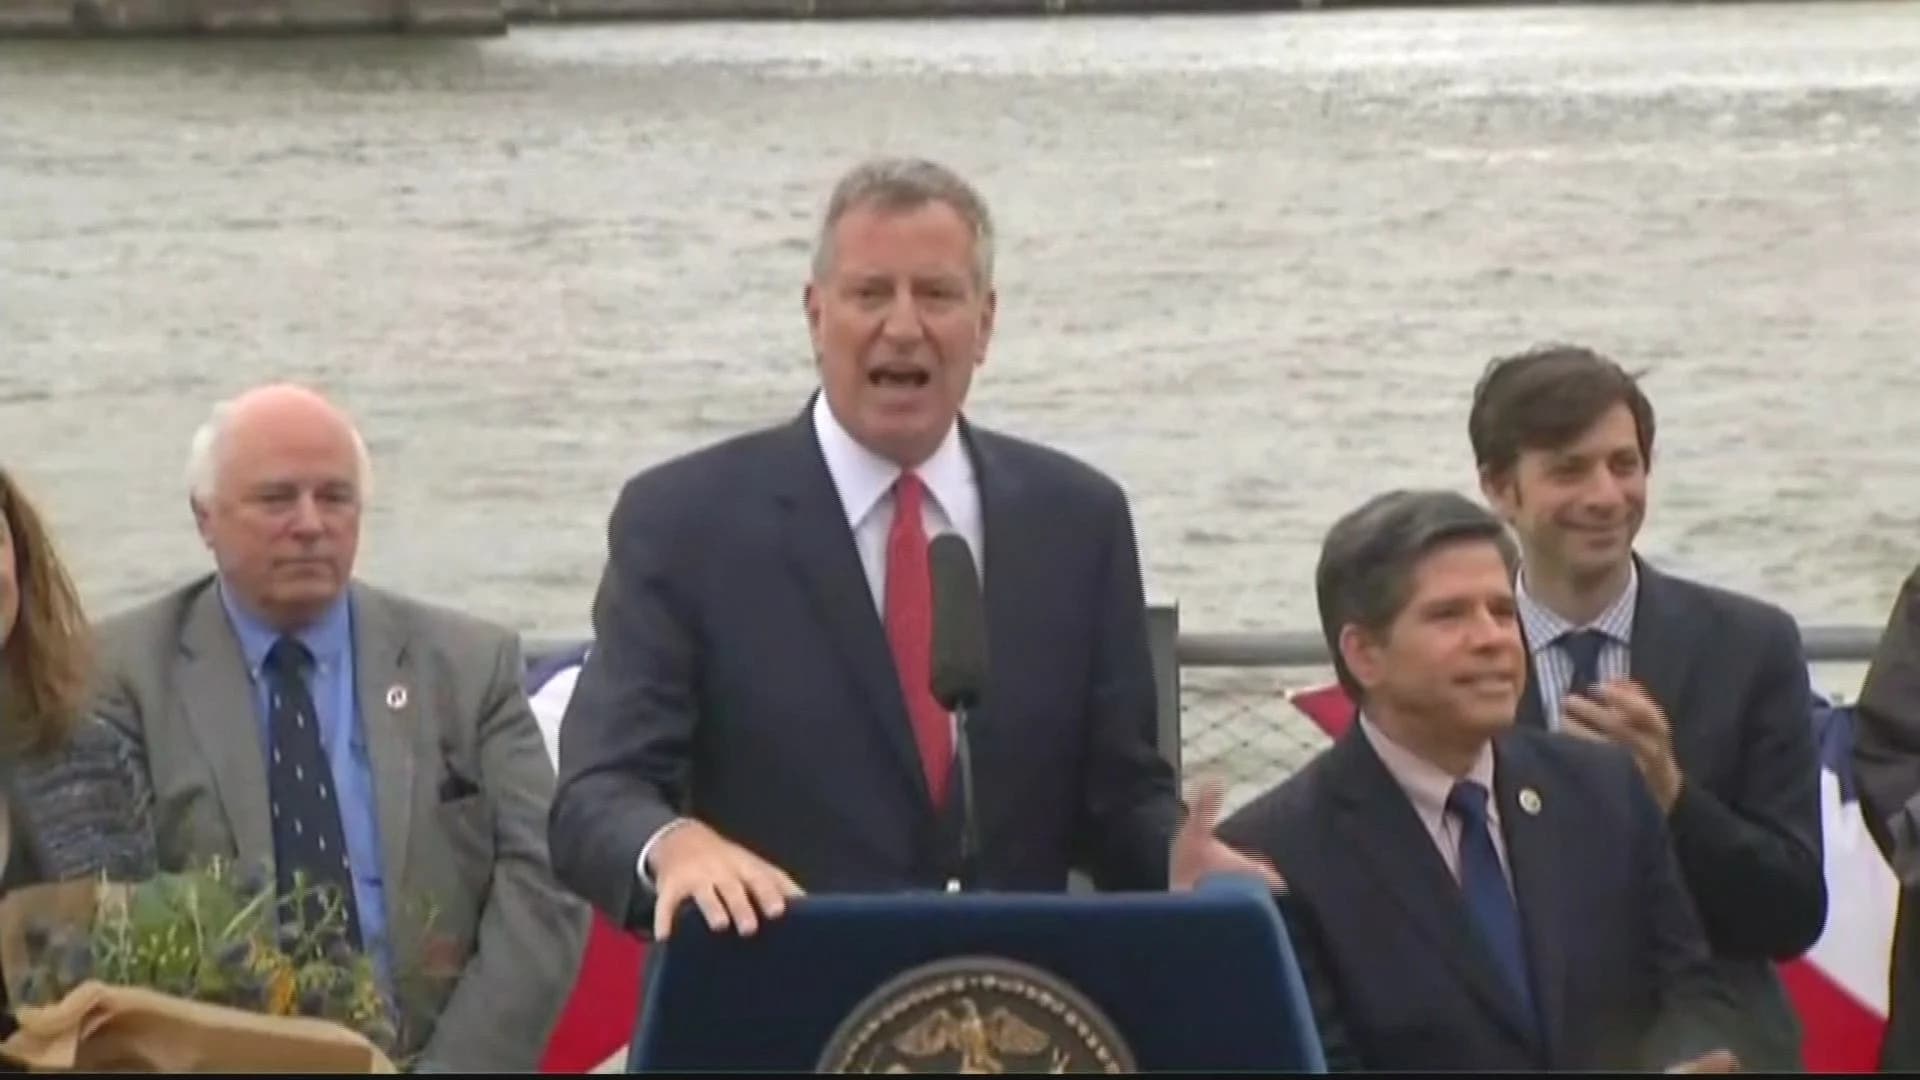 NYC expands ferry service